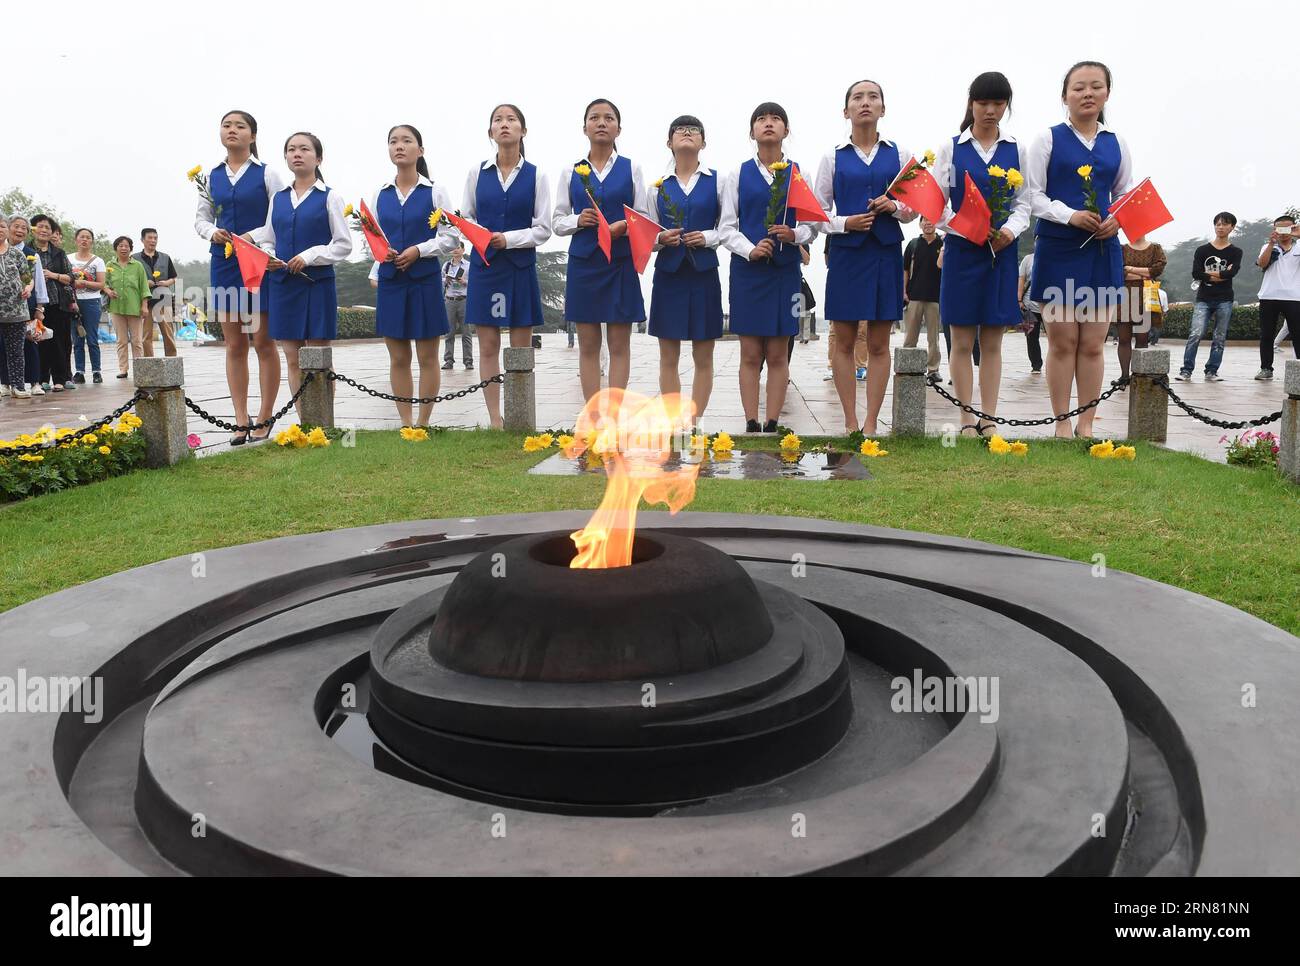 (150930) -- NANJING, Sept. 30, 2015 -- Students attend a ceremony to honor and remember deceased national heroes on the country s second Martyrs Day in Yuhuatai cemetery of martyrs in Nanjing, east China s Jiangsu Province, Sept. 30, 2015. ) (mcg) CHINA-MARTYRS DAY-CEREMONY (CN) SunxCan PUBLICATIONxNOTxINxCHN   Nanjing Sept 30 2015 Students attend a Ceremony to HONOR and Remember deceased National Heroes ON The Country S Second Martyrs Day in Yuhuatai Cemetery of Martyrs in Nanjing East China S Jiangsu Province Sept 30 2015 McG China Martyrs Day Ceremony CN SunxCan PUBLICATIONxNOTxINxCHN Stock Photo